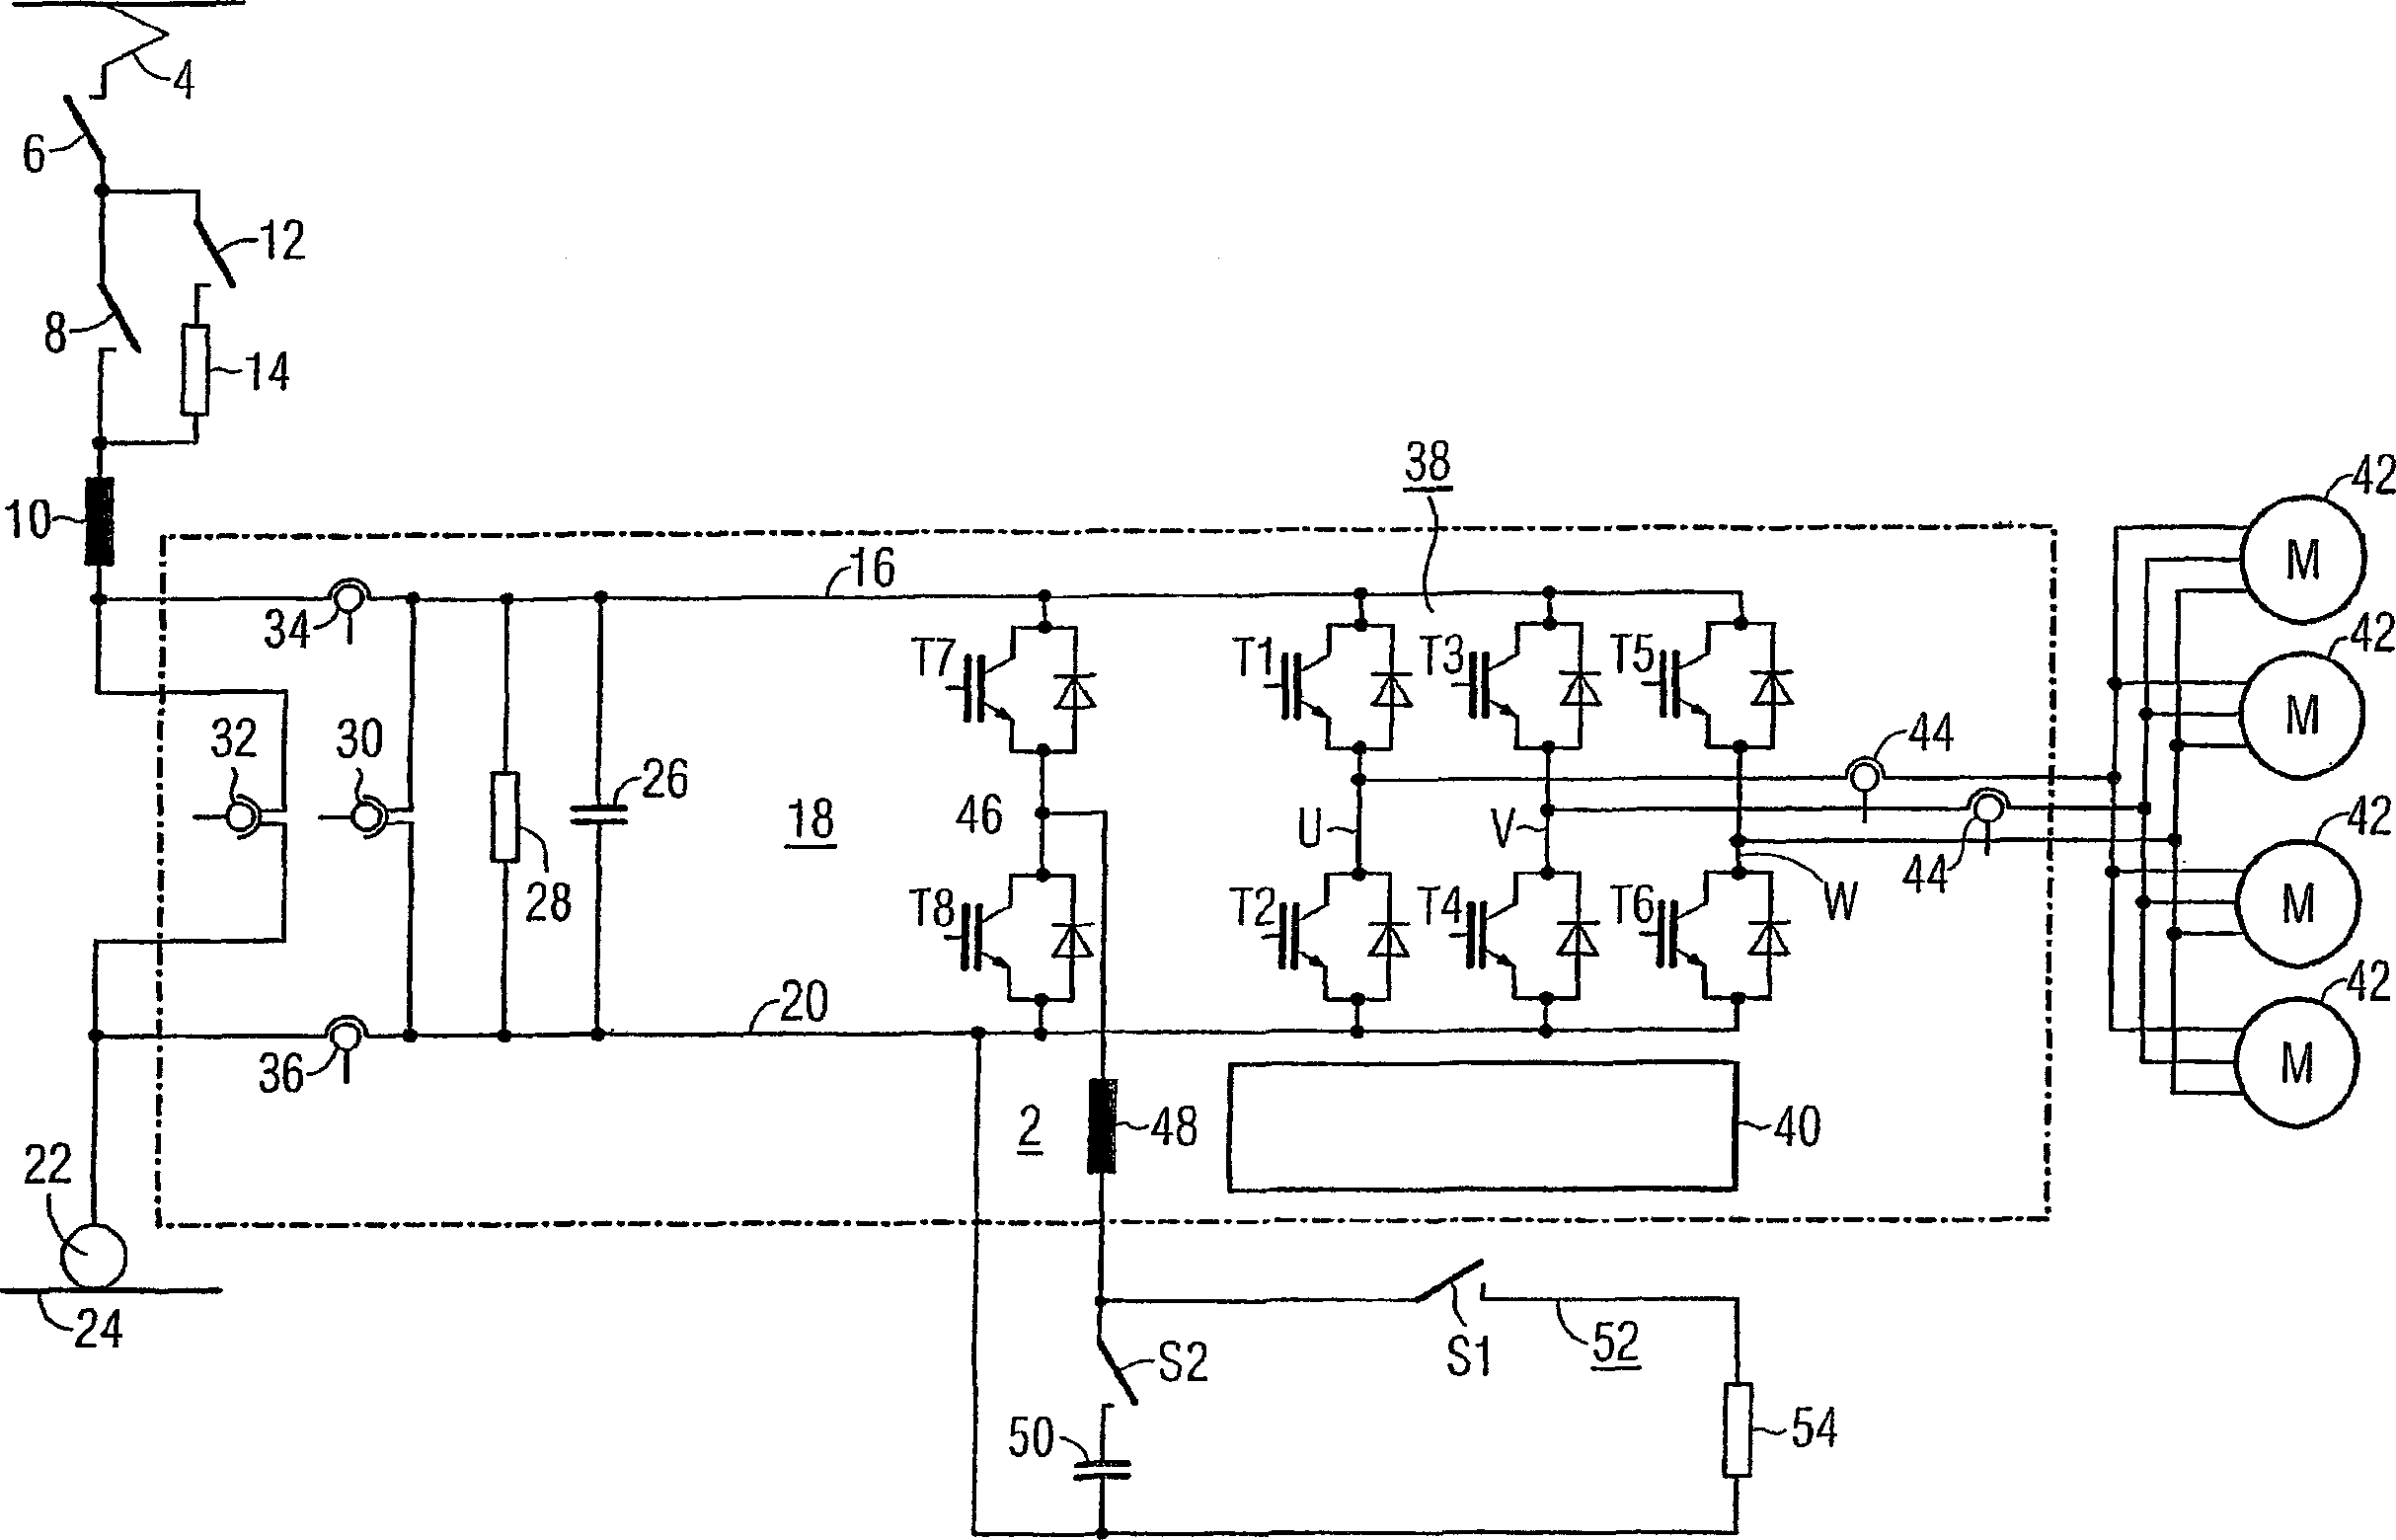 Surge limiter for a traction power converter